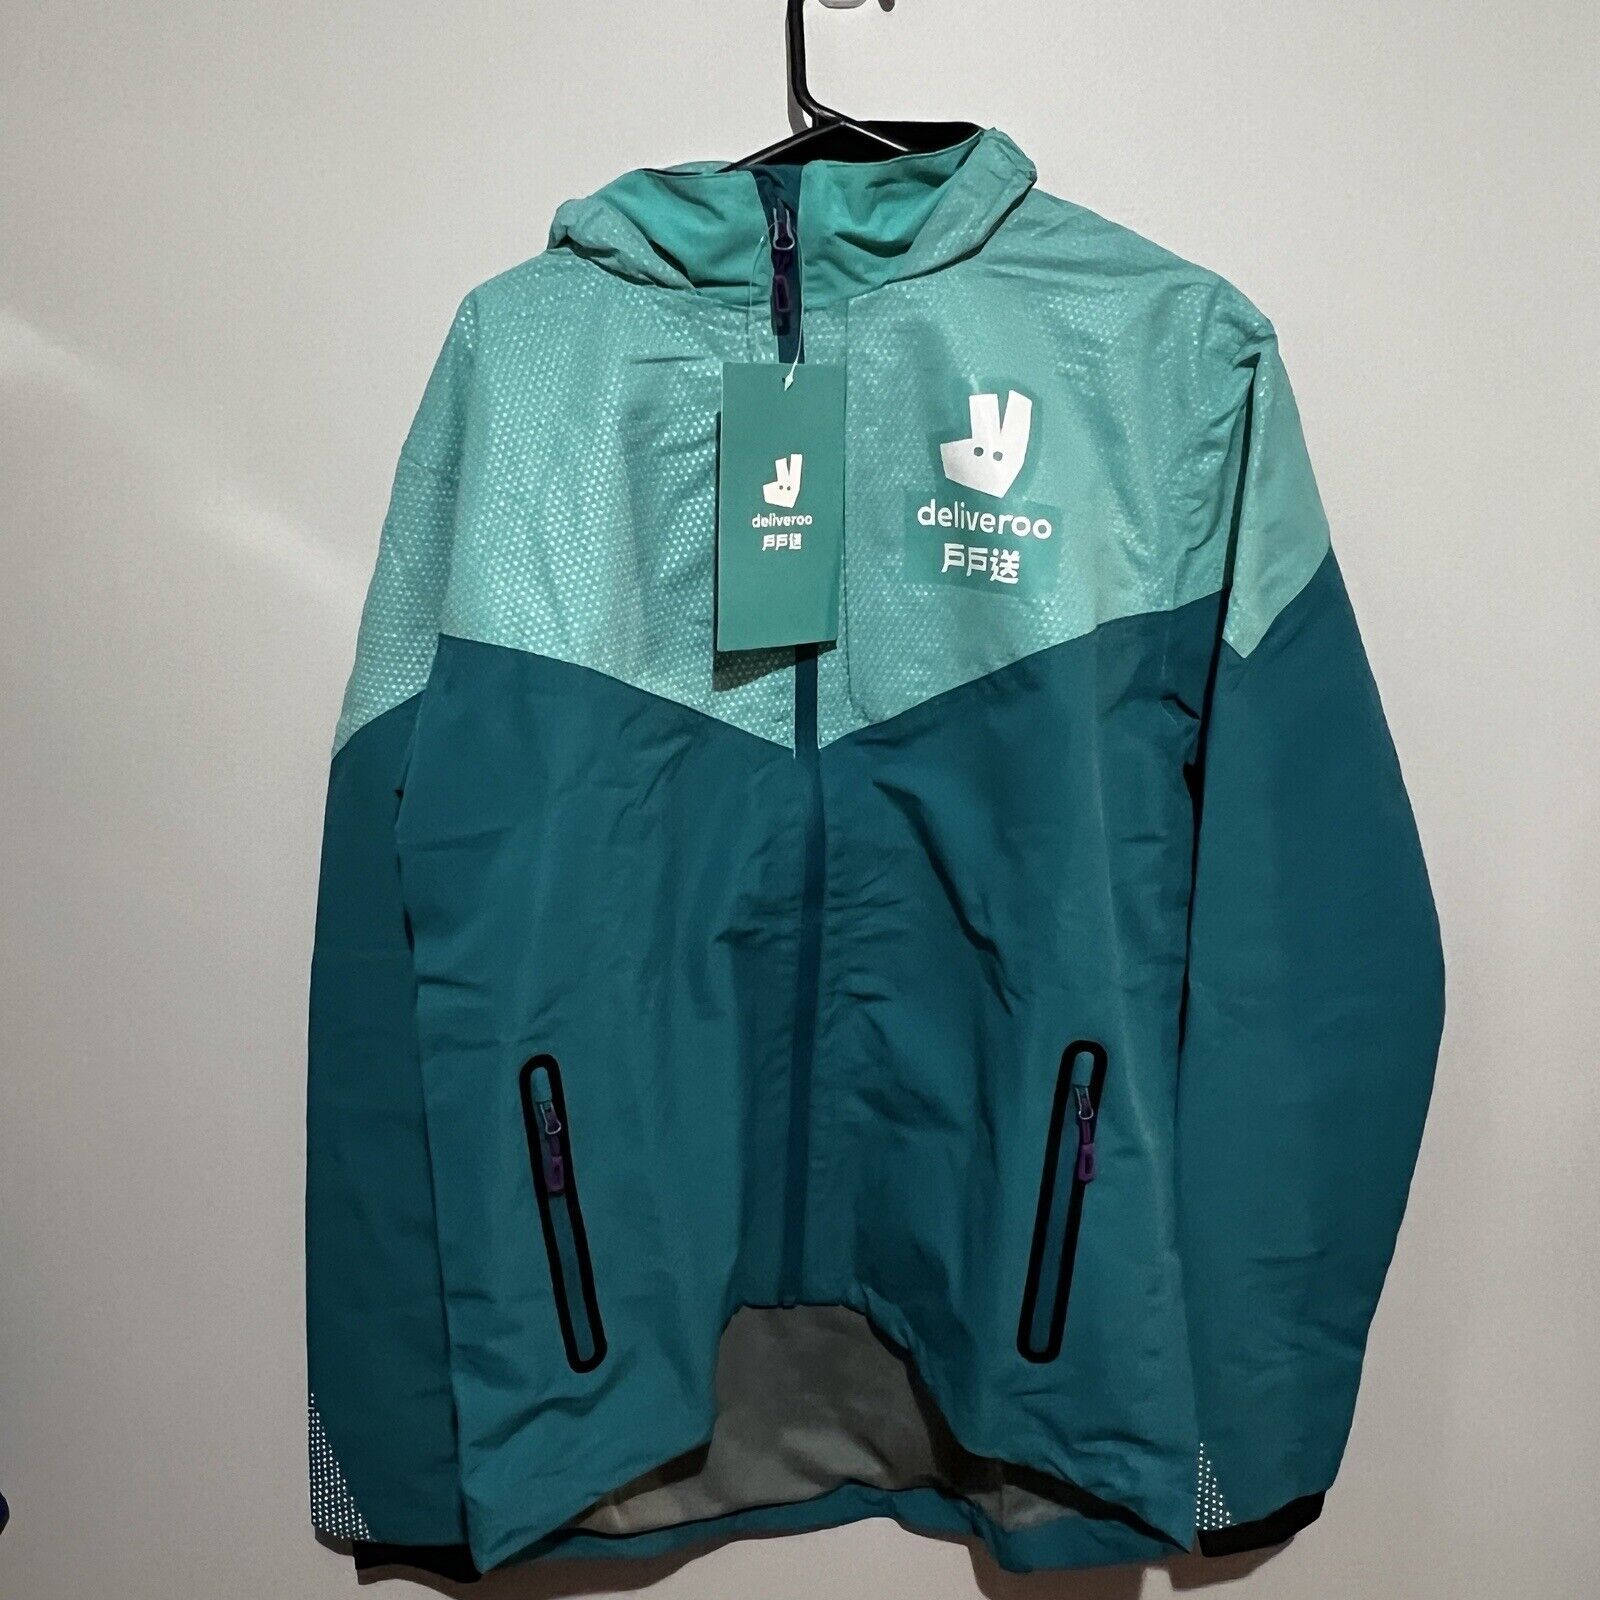 Deliveroo Jacket Reflective Cycling Windbreaker Waterproof Zip New With Tags